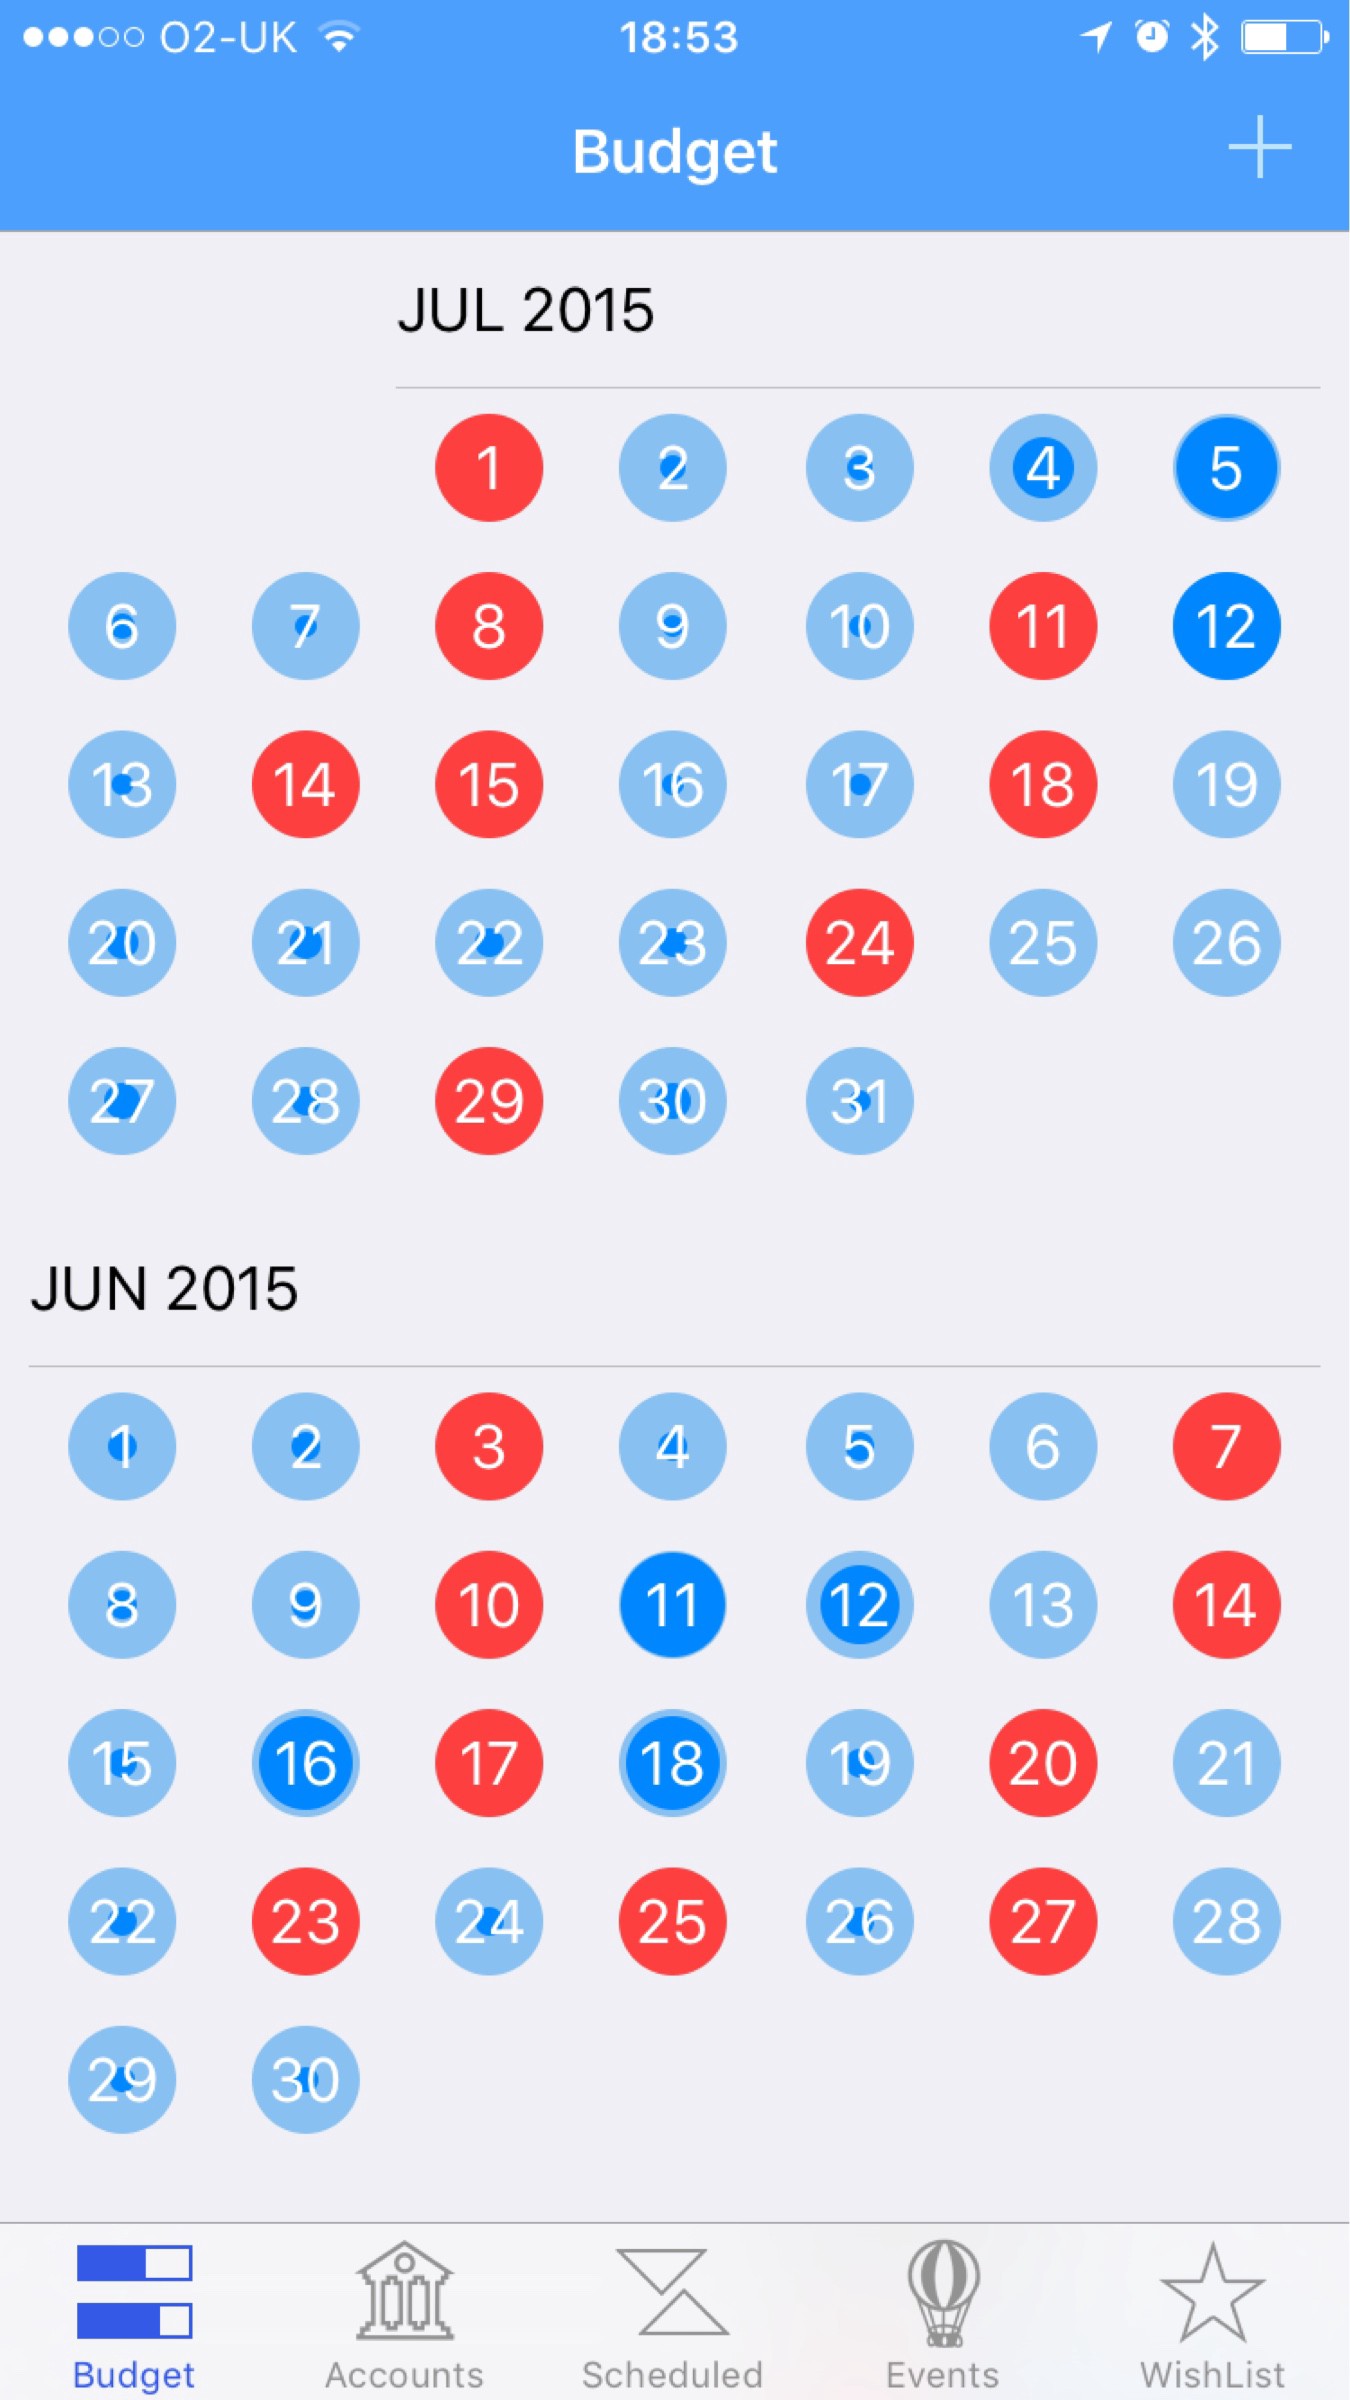 June and July 2015 with my own budgeting data, displayed in the Budget Calendar.